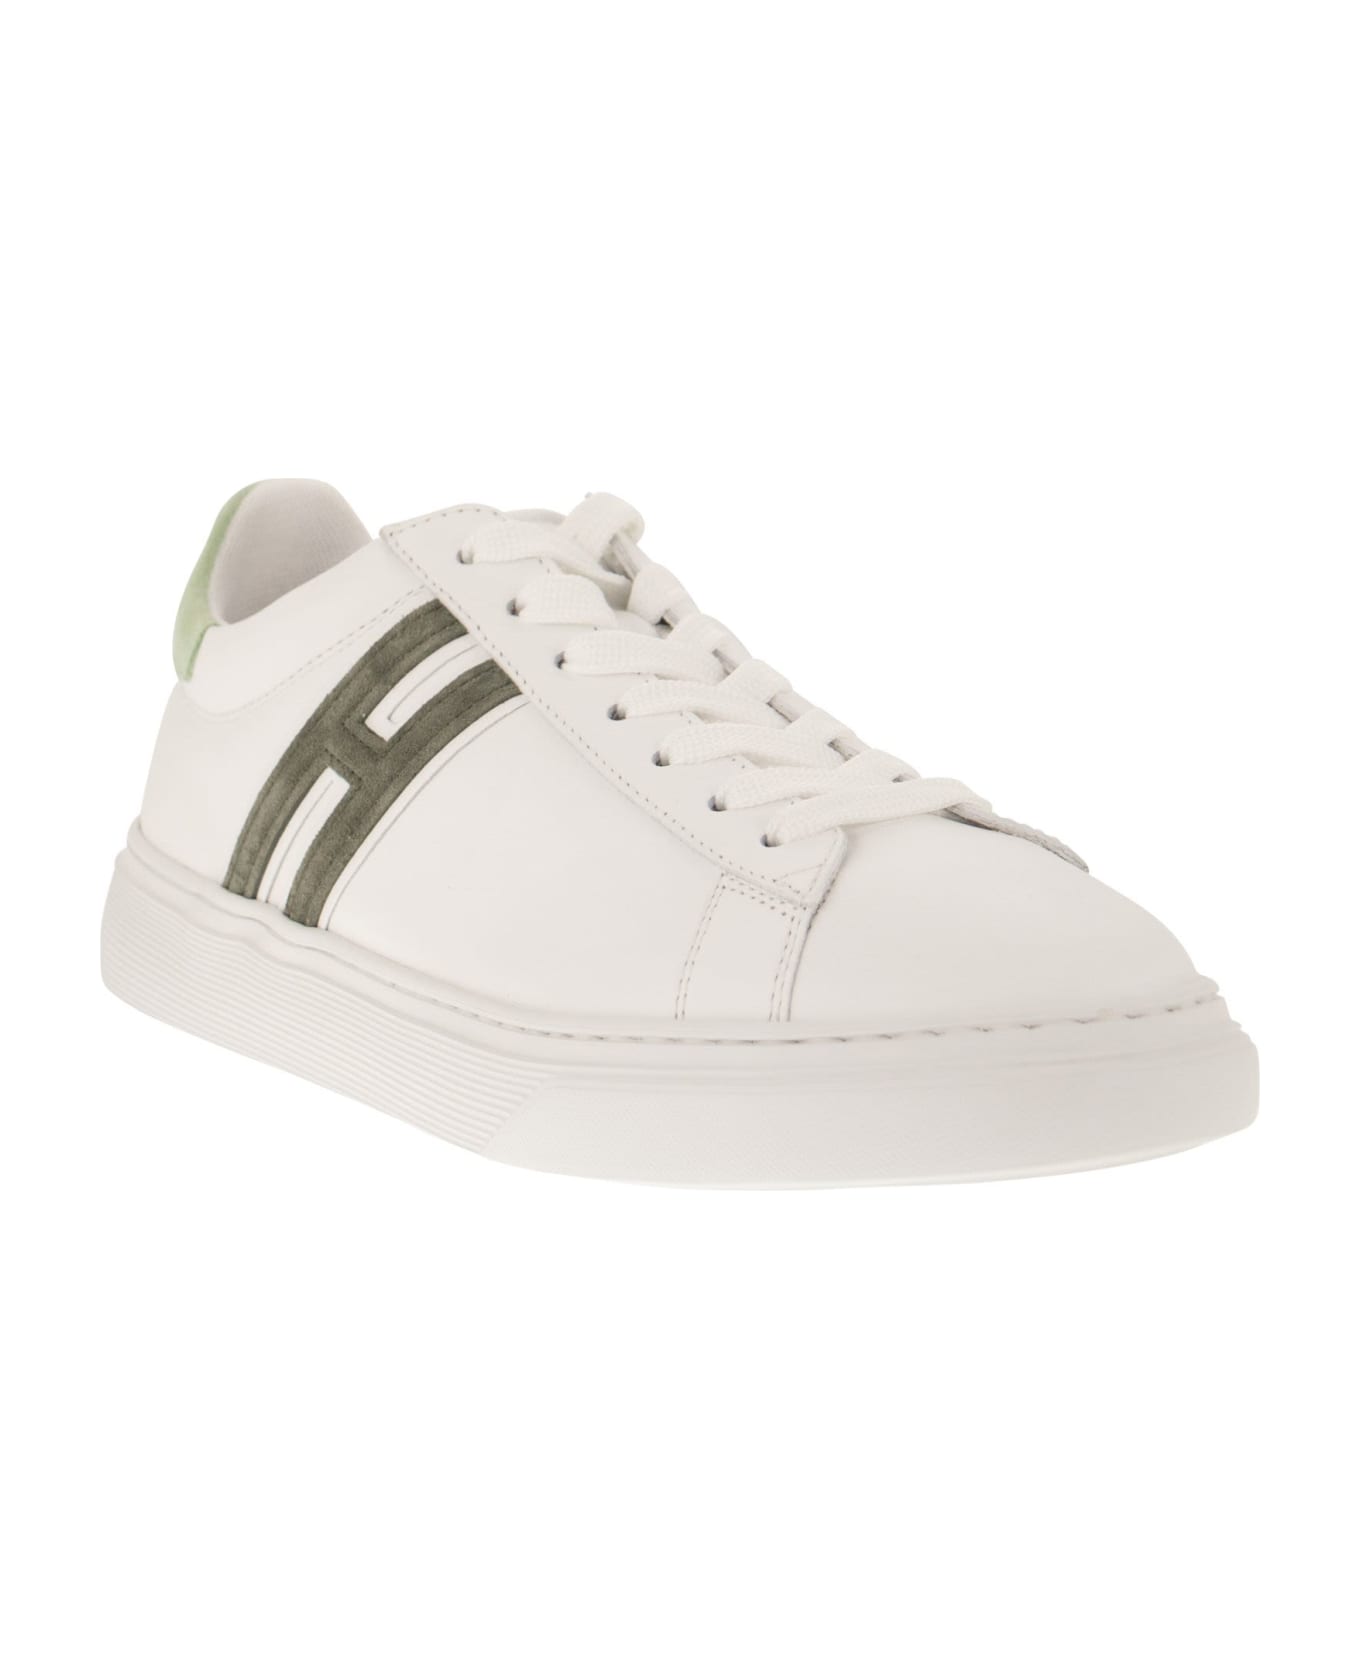 Hogan Sneakers "h365" In Leather - Green/white